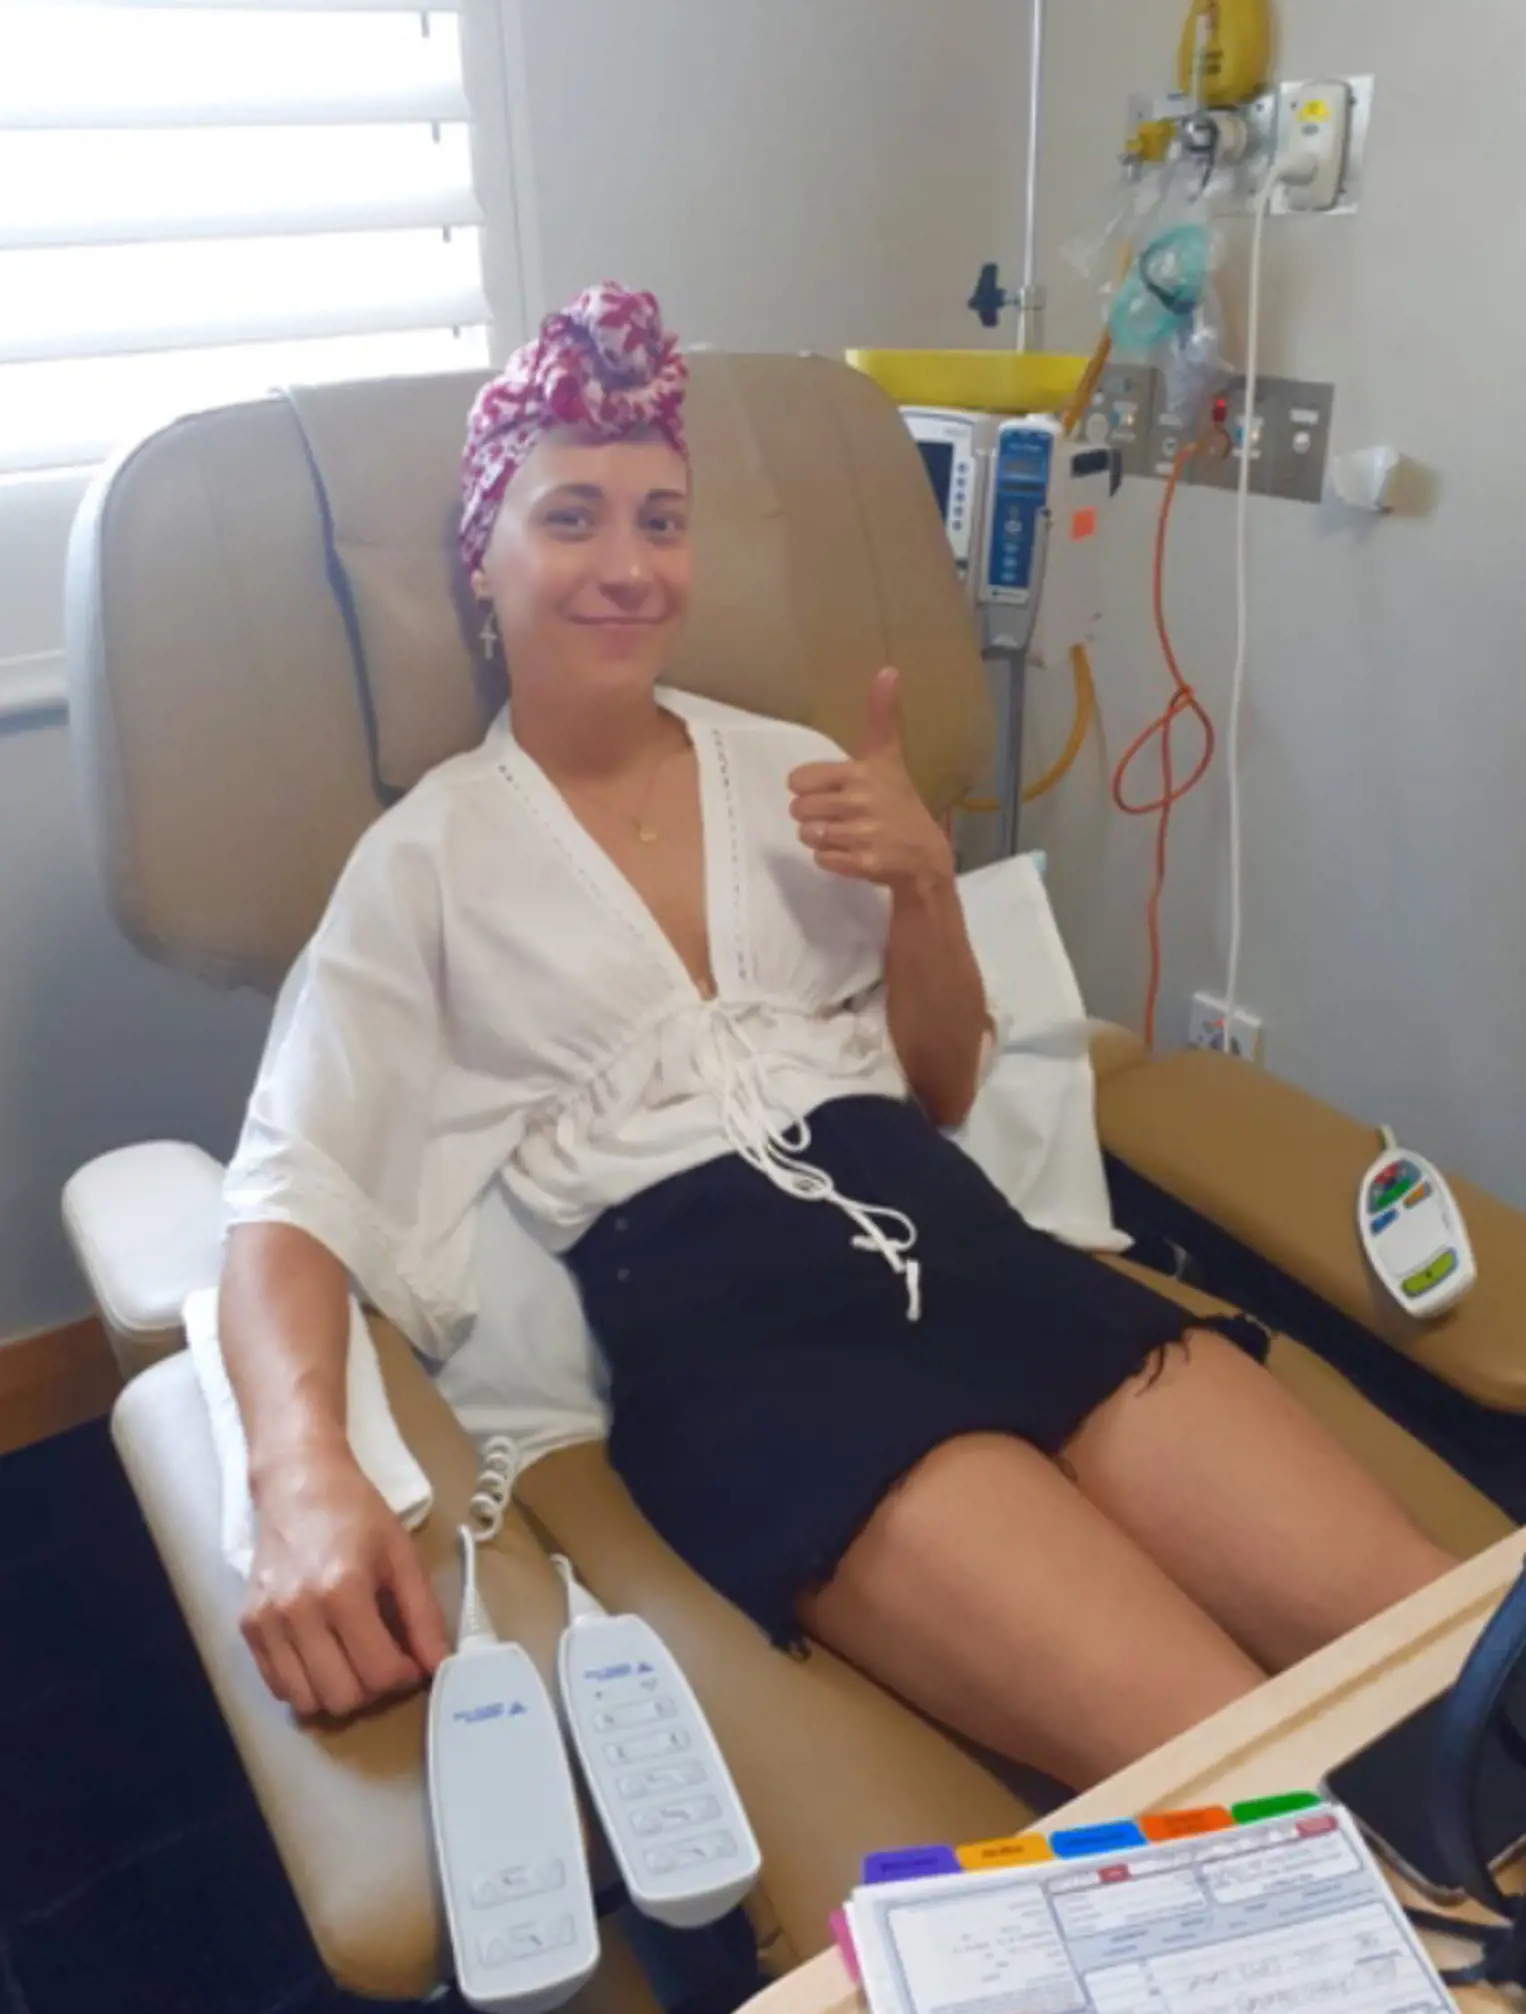 Lauren sitting in hospital chair receiving treatment, there are monitors behind her, she wears a pink and white headscarf and is smiling at the camera with her thumbs up